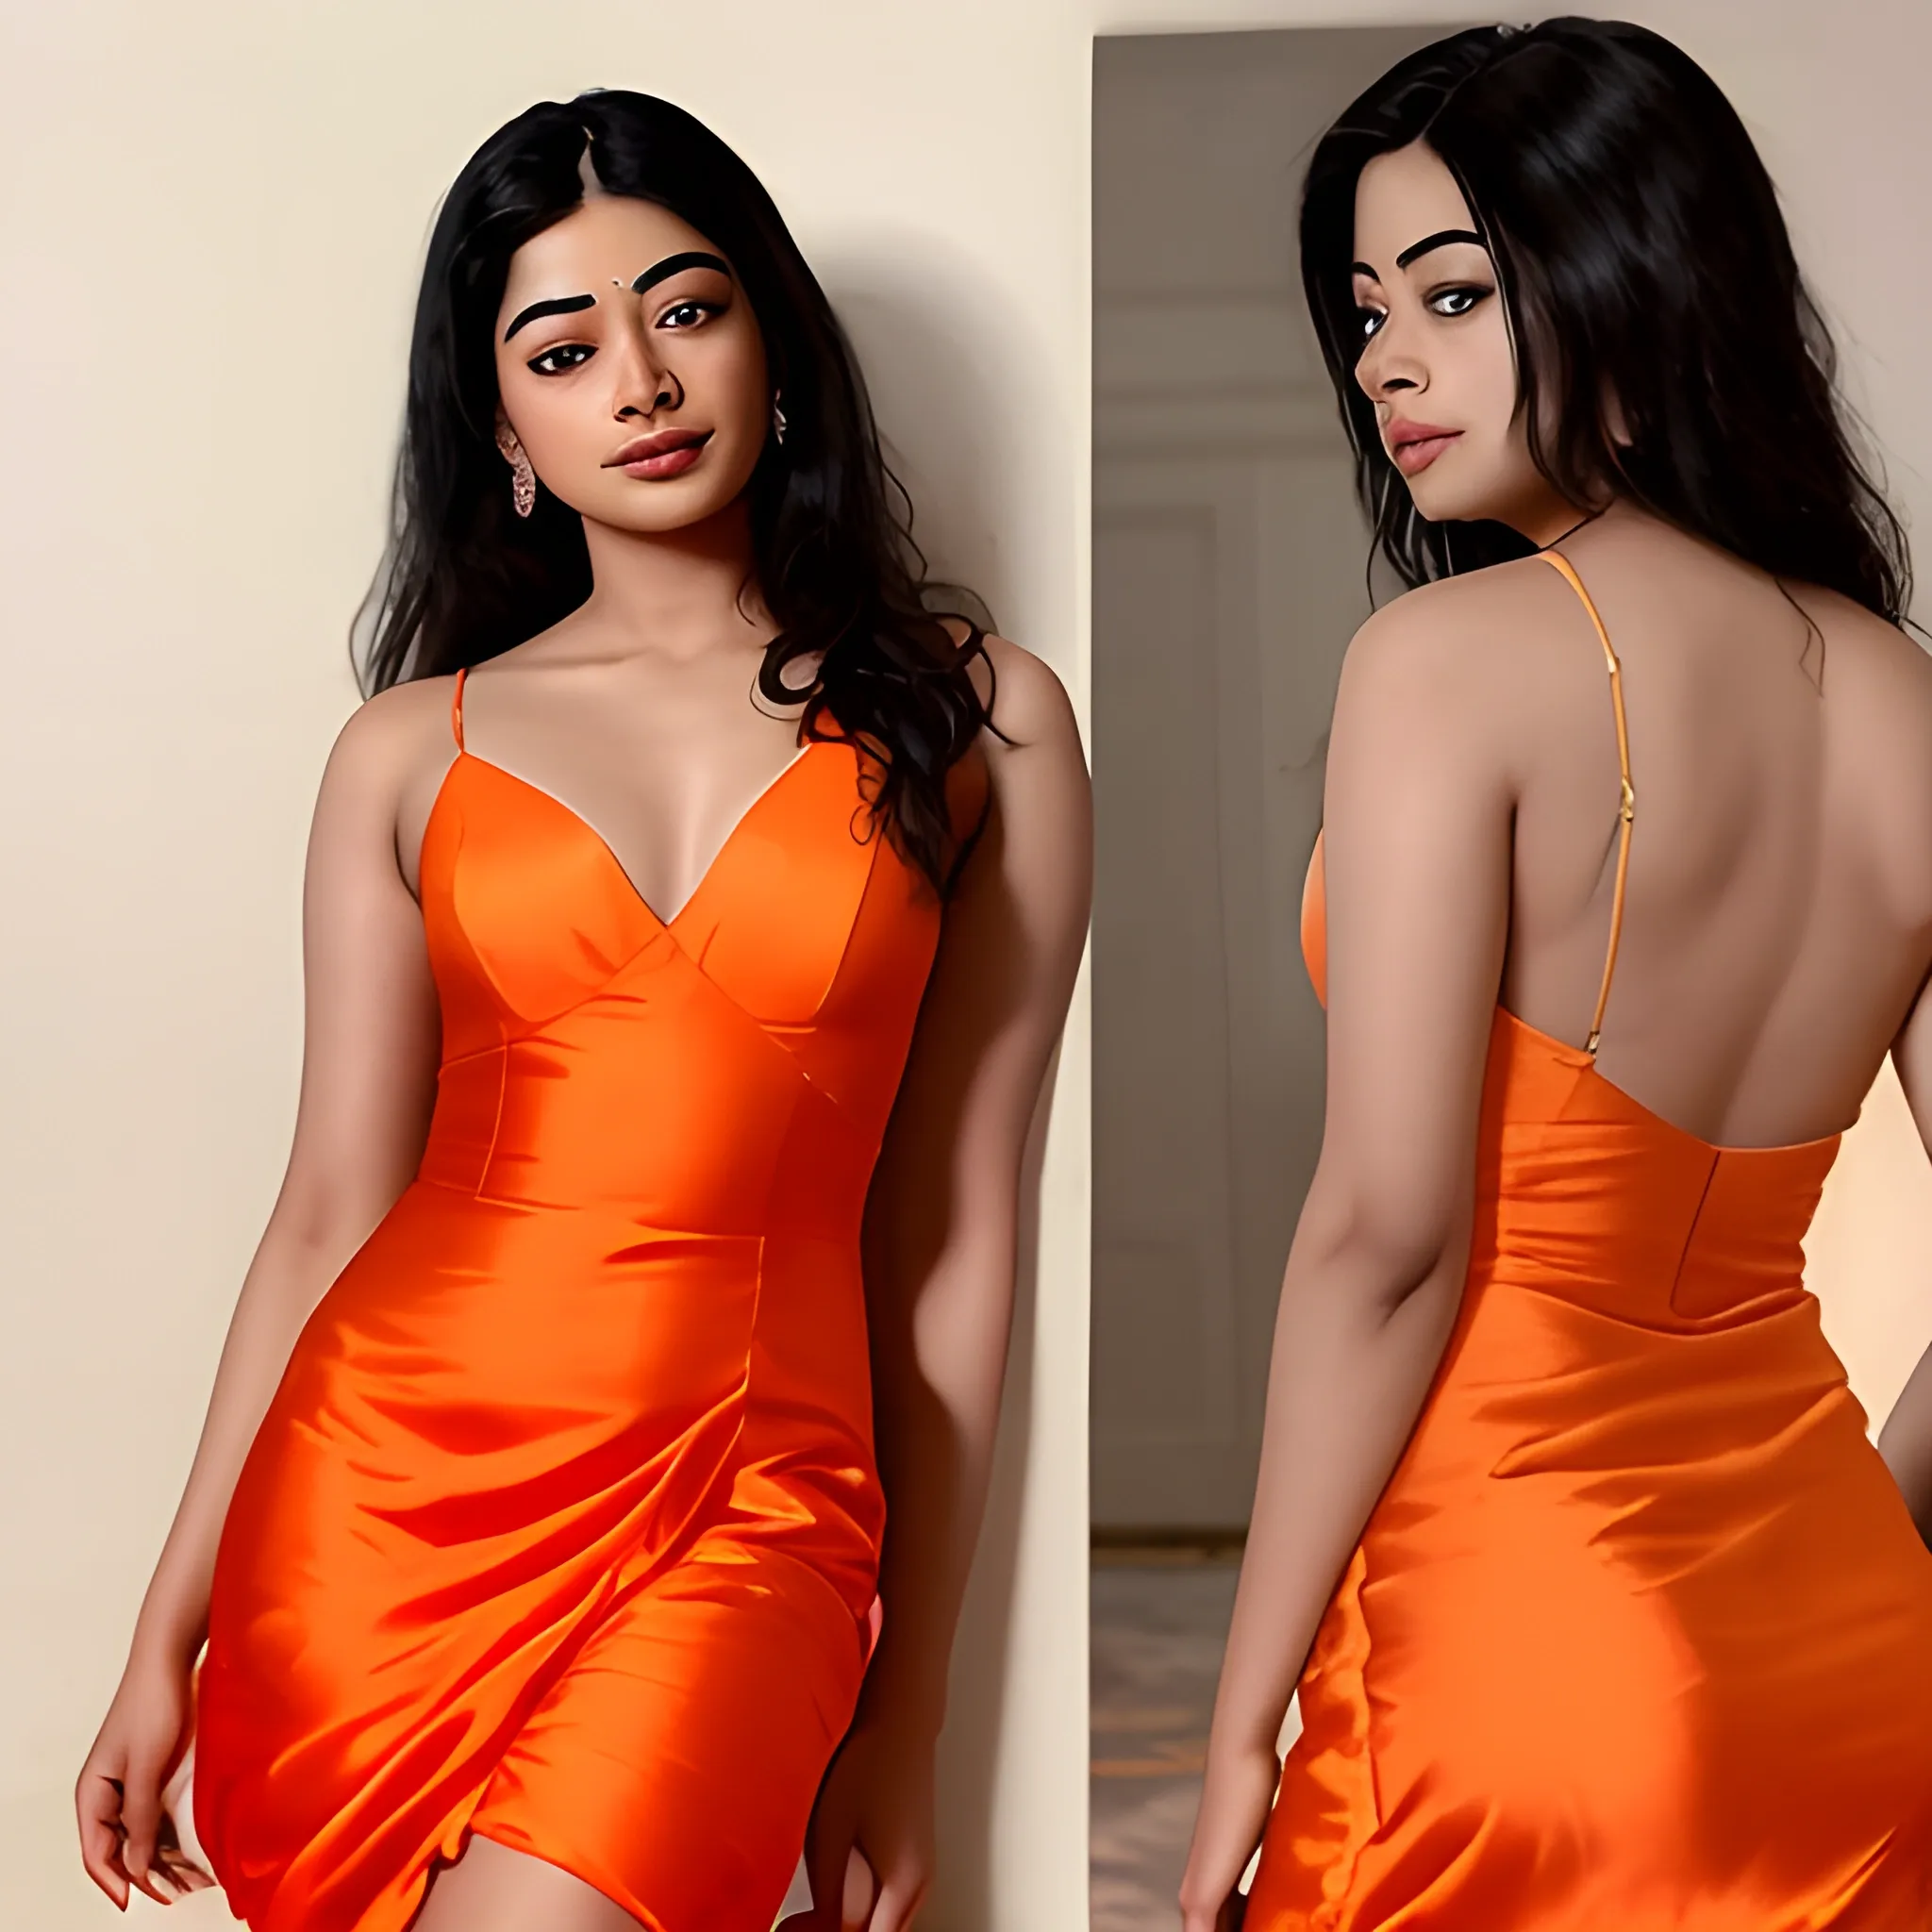 Rashmika Mandanna is a heart-stealer in her red carpet outfit